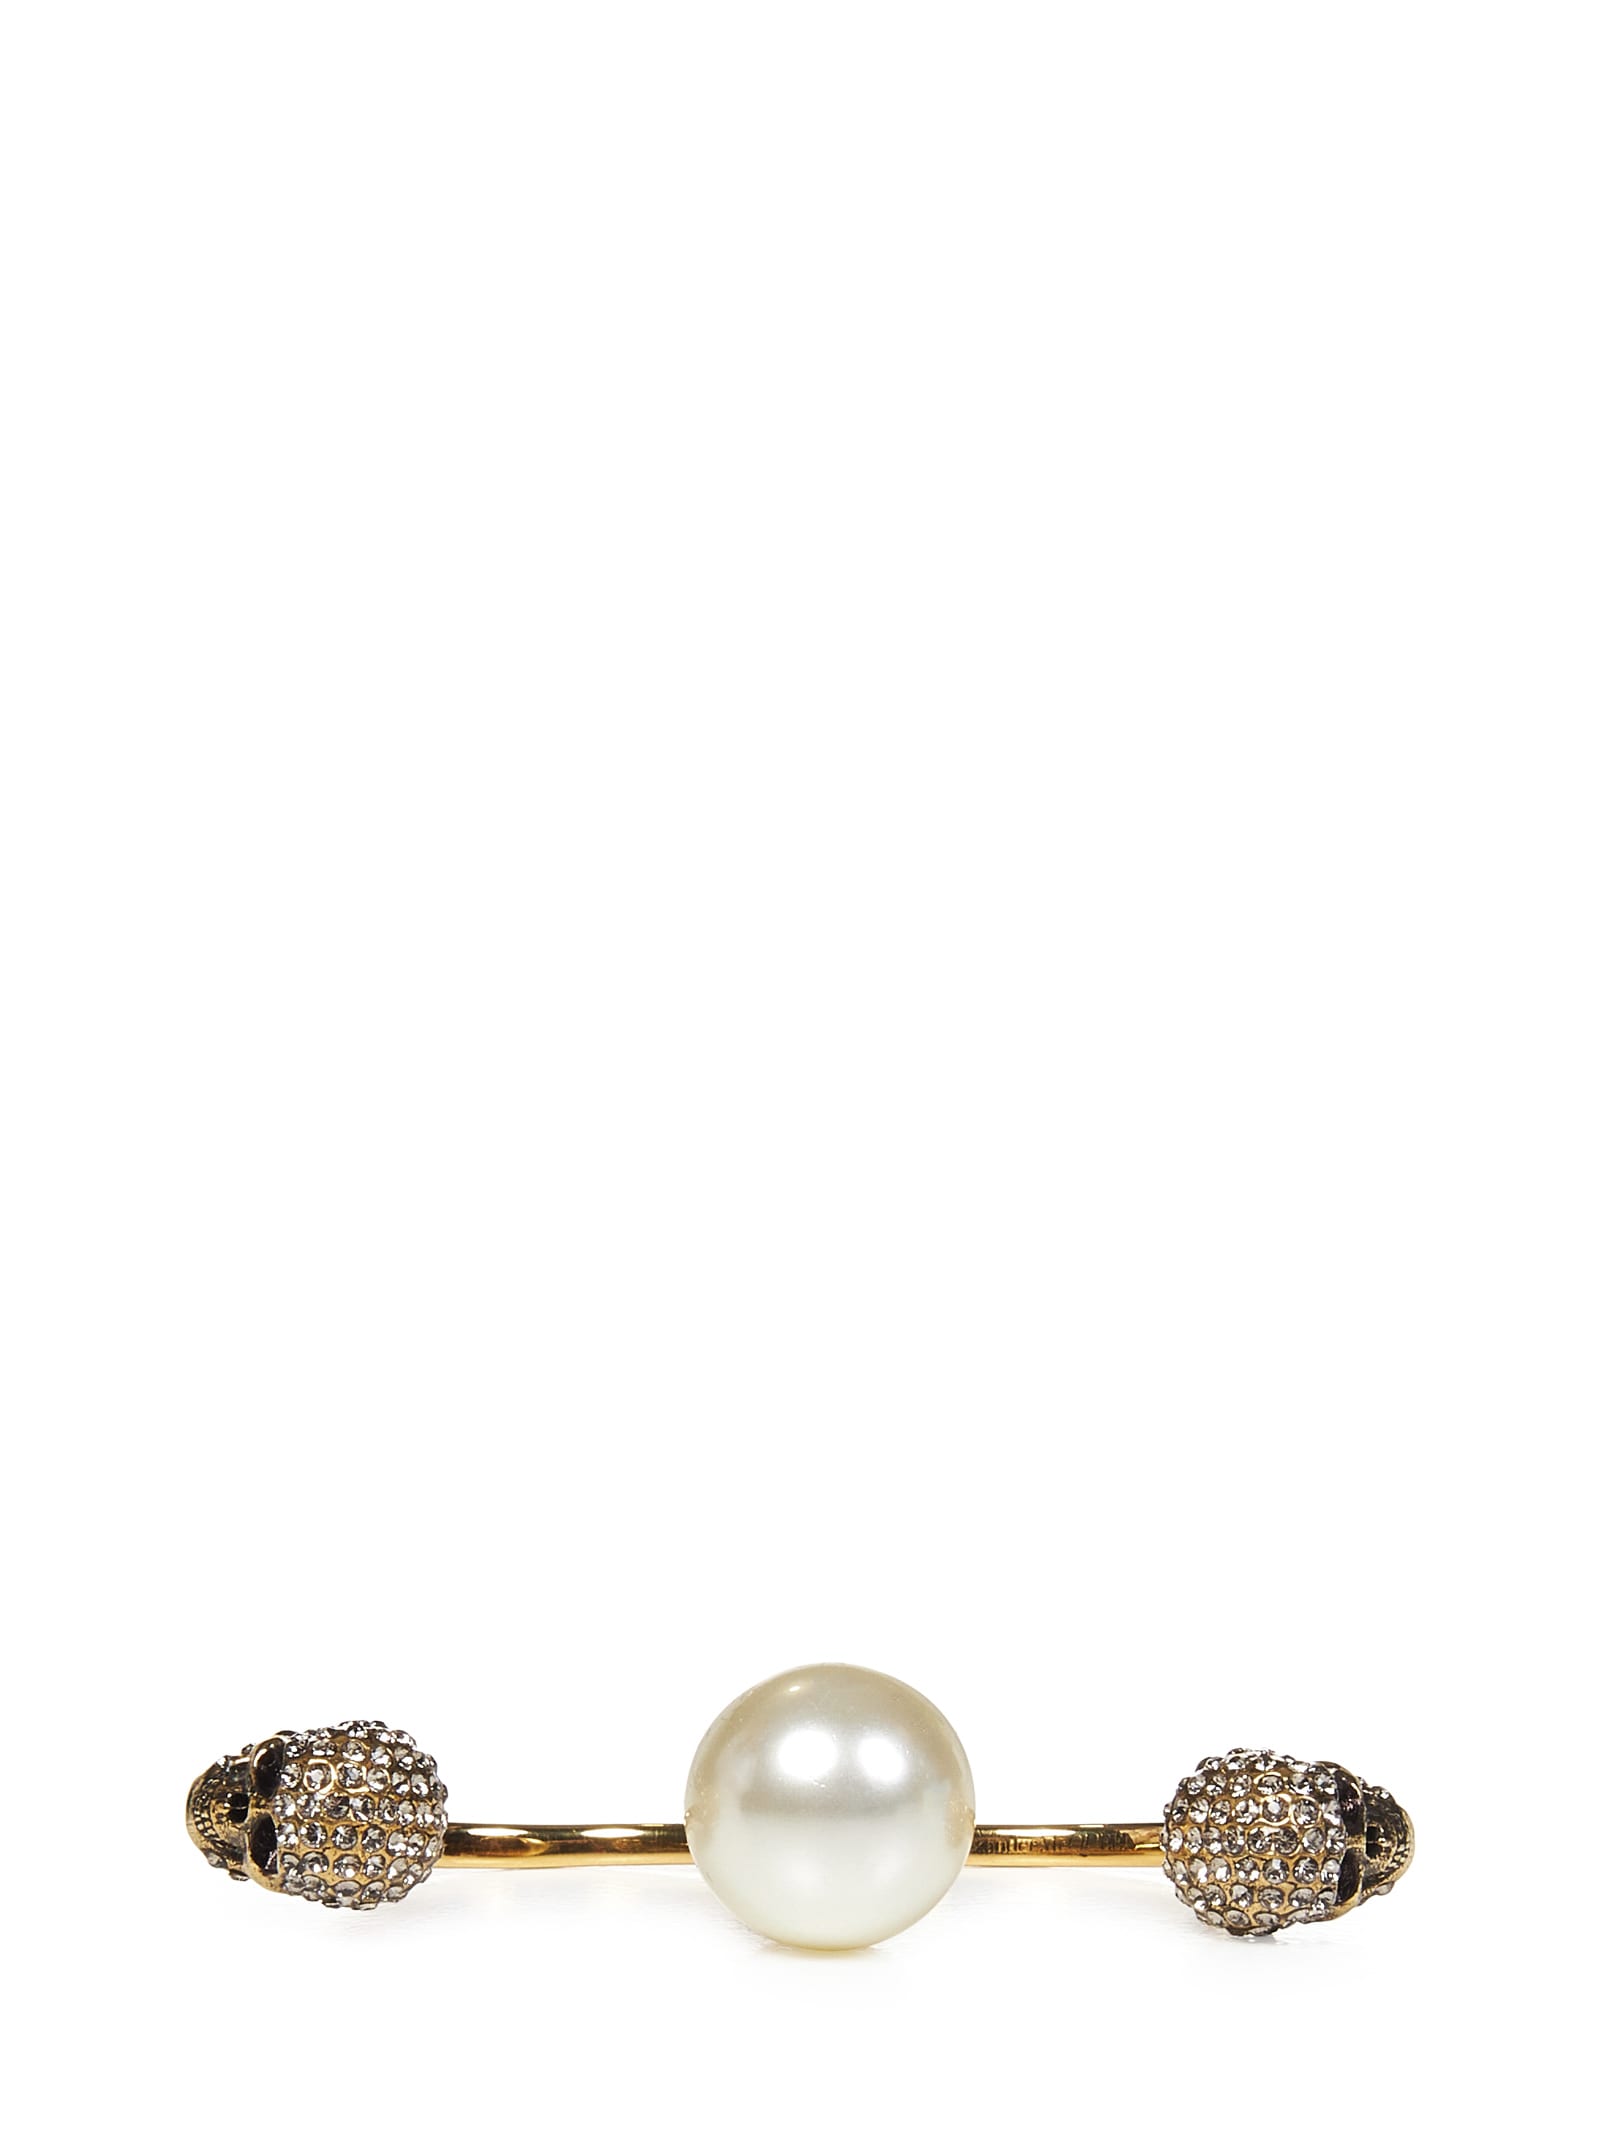 Antiqued Gold Double Pearl Skull Ring